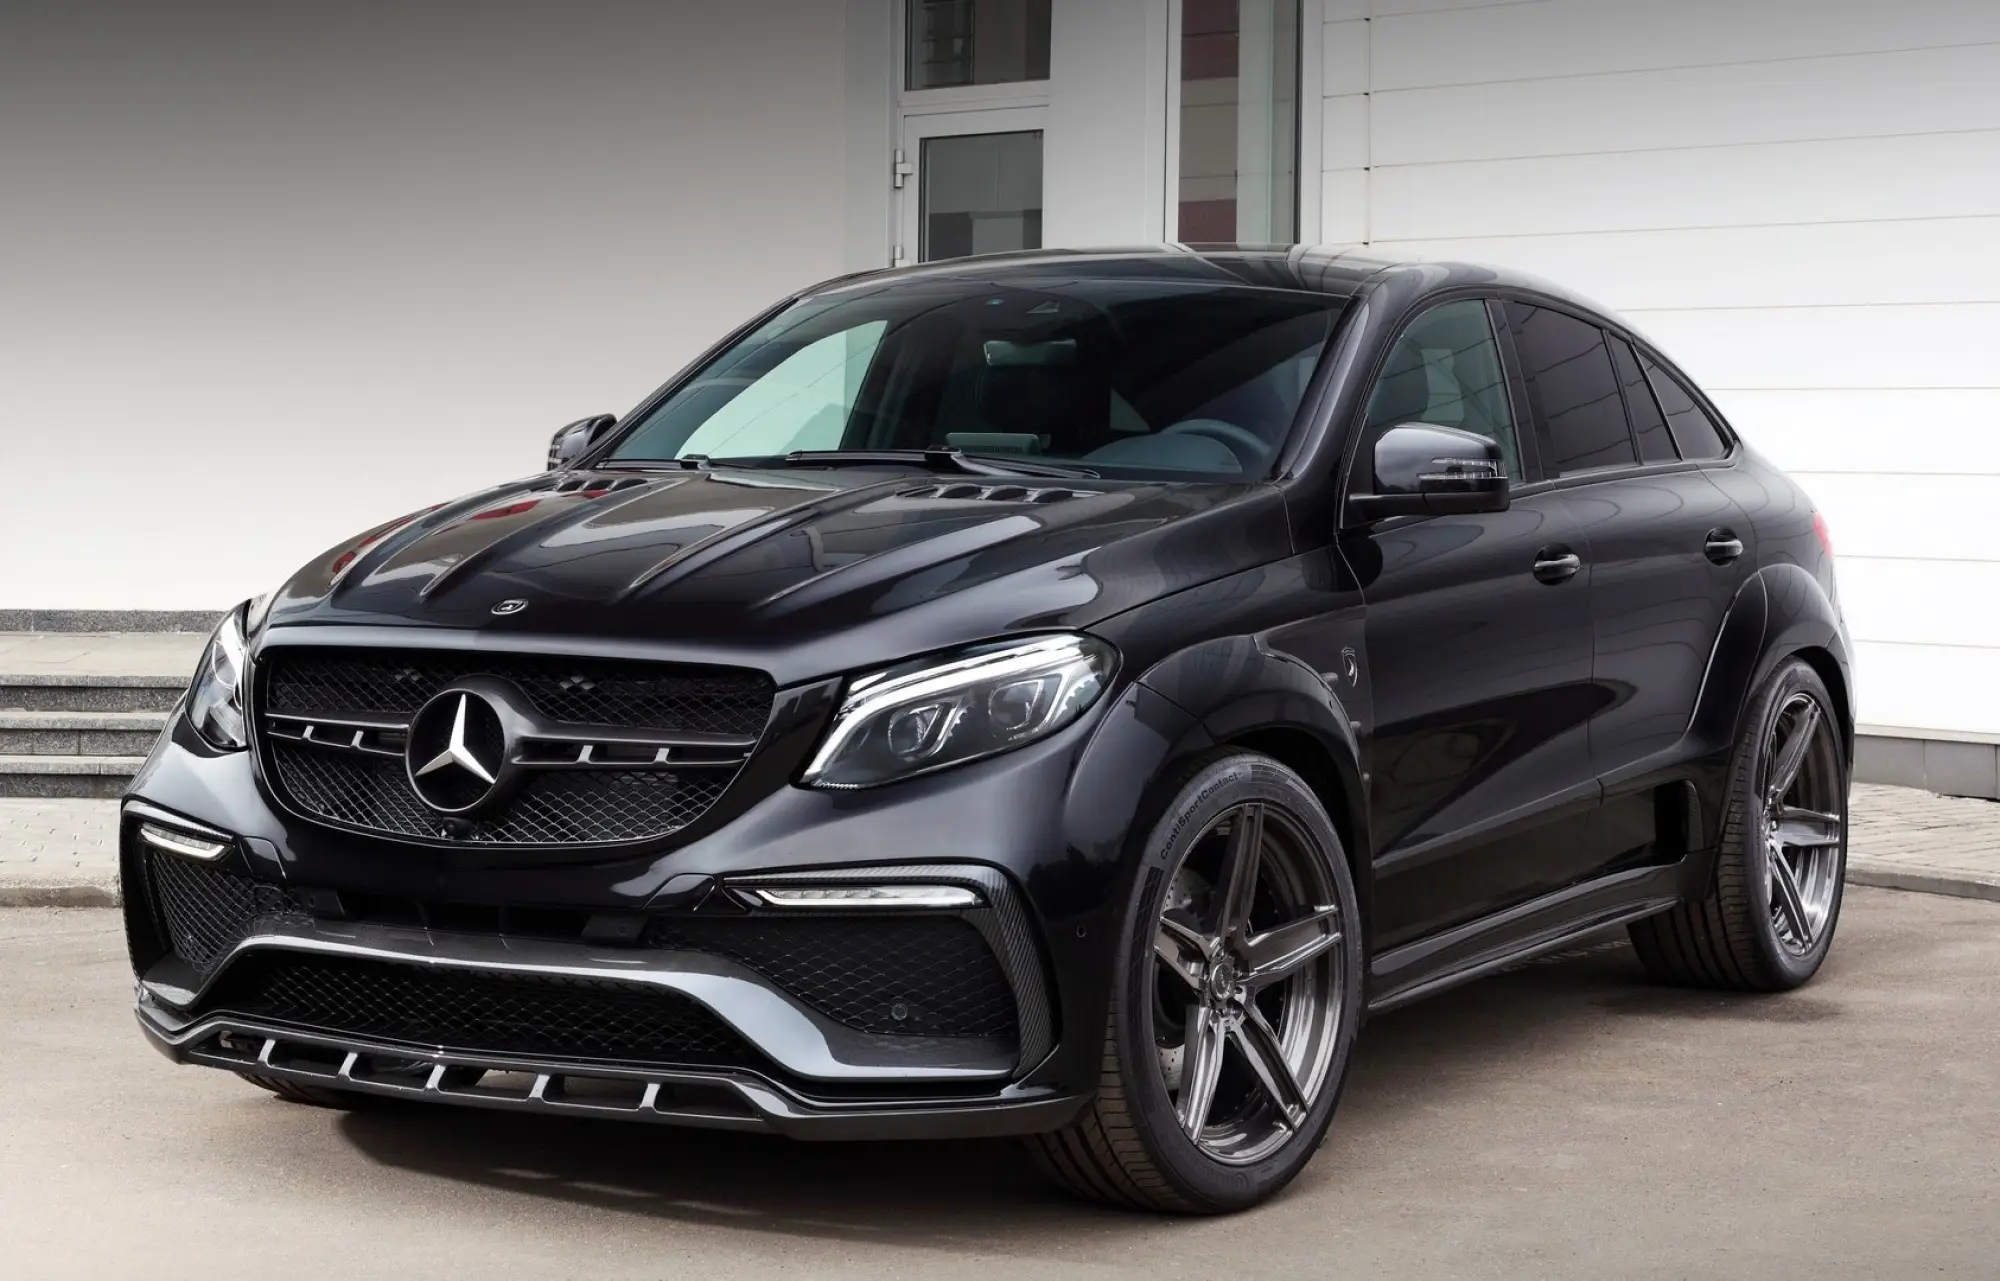 Mercedes GLE Coupe by Topcar - 1